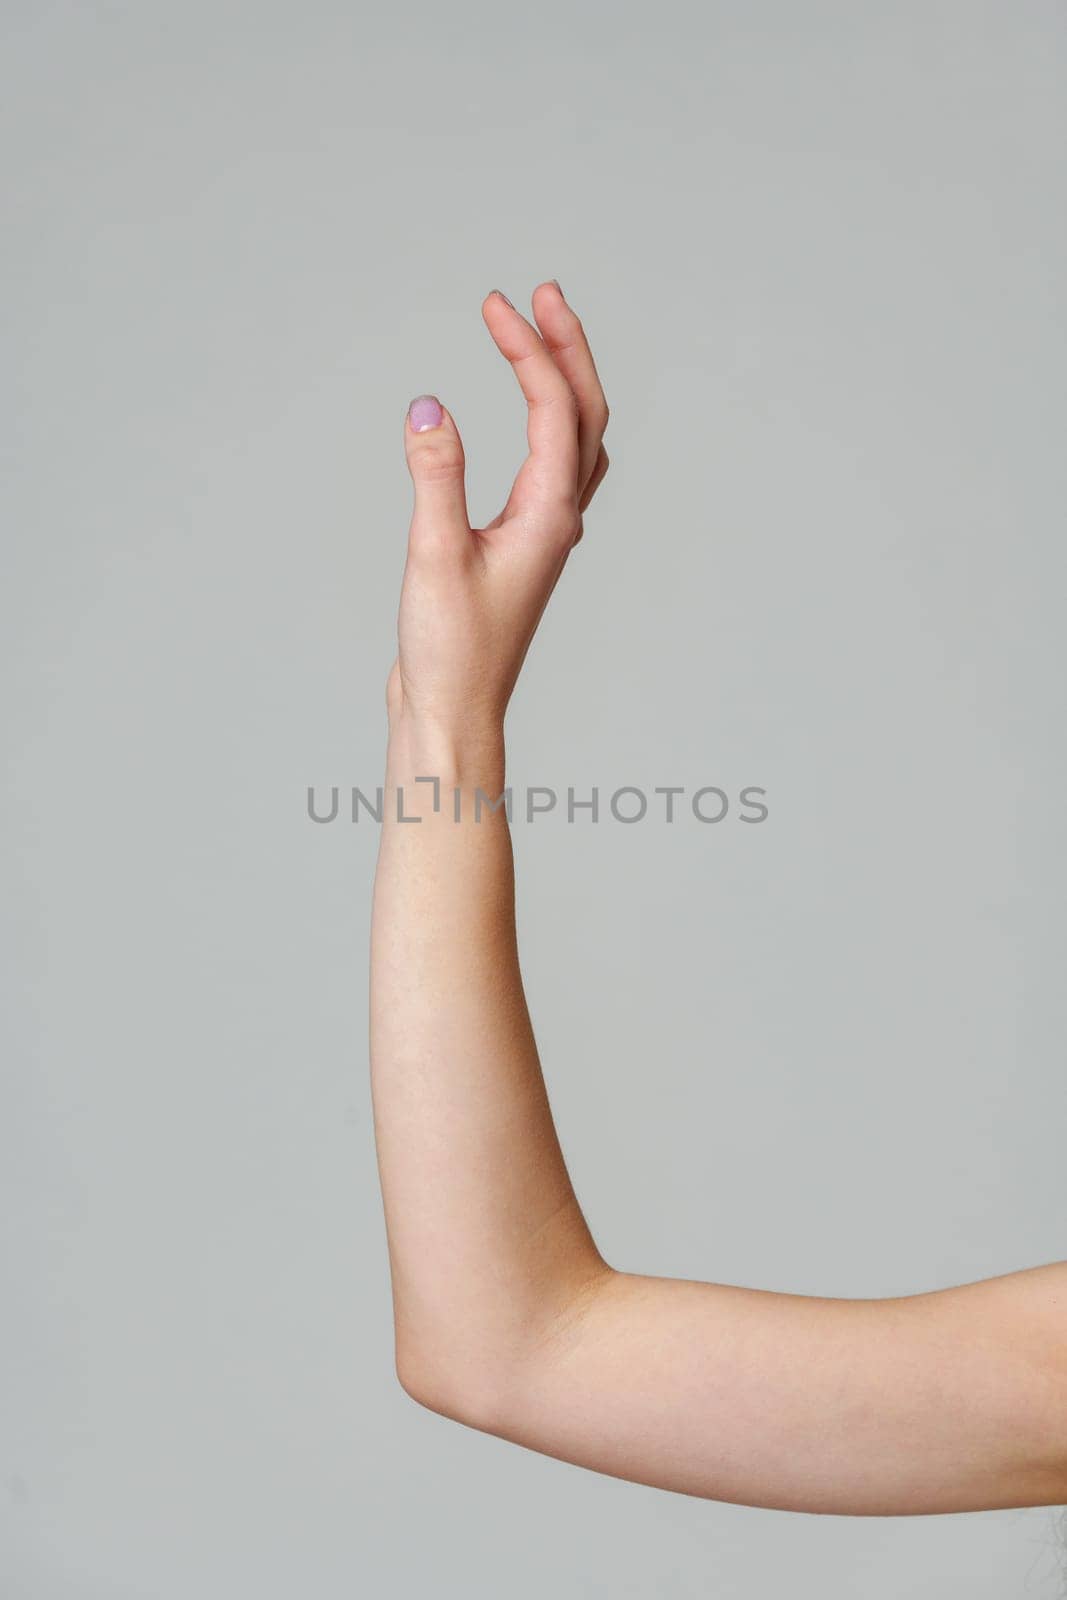 Female hand sign against gray background in studio close up